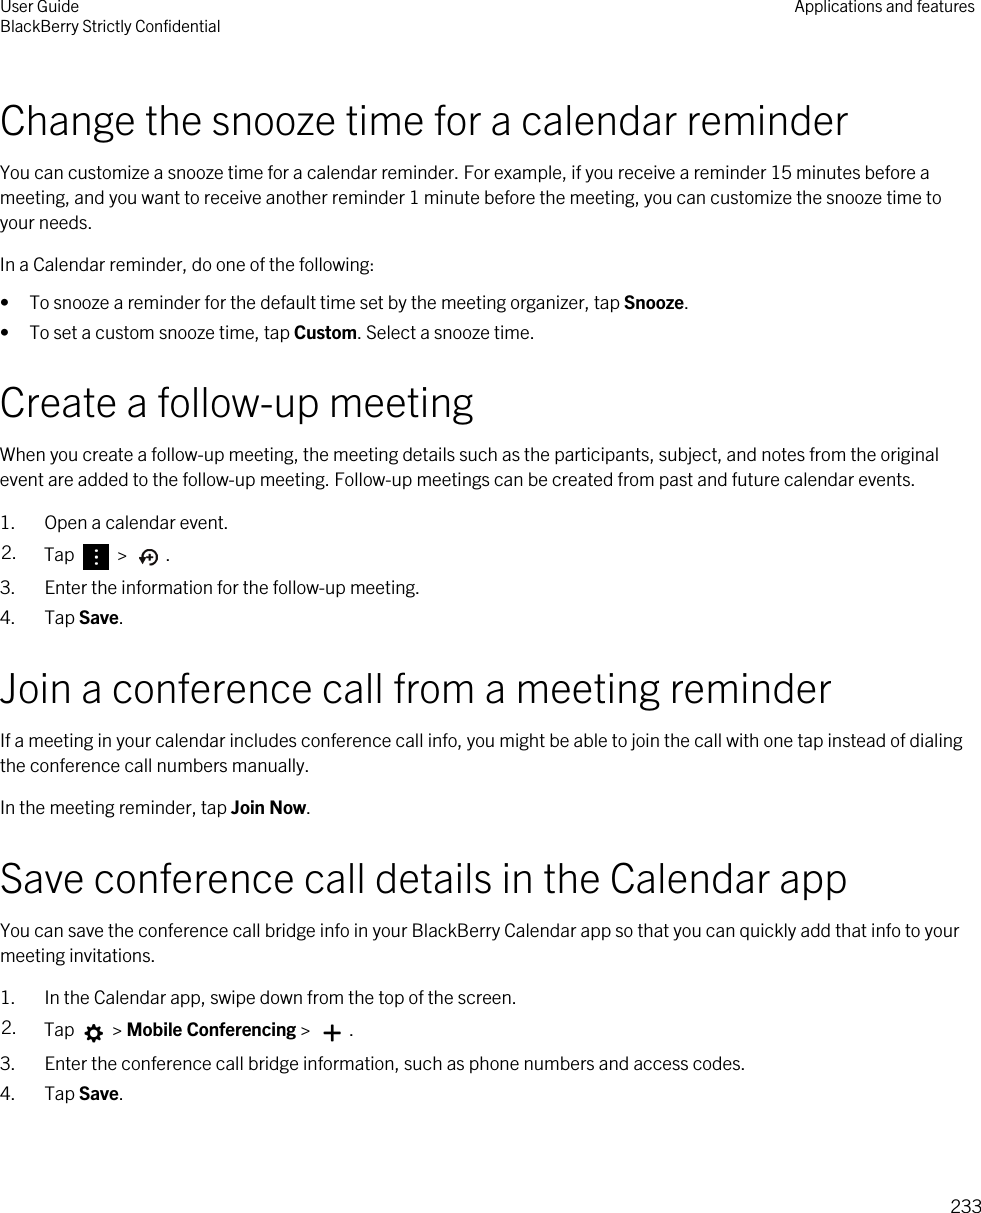 Change the snooze time for a calendar reminderYou can customize a snooze time for a calendar reminder. For example, if you receive a reminder 15 minutes before a meeting, and you want to receive another reminder 1 minute before the meeting, you can customize the snooze time to your needs.In a Calendar reminder, do one of the following:• To snooze a reminder for the default time set by the meeting organizer, tap Snooze.• To set a custom snooze time, tap Custom. Select a snooze time.Create a follow-up meetingWhen you create a follow-up meeting, the meeting details such as the participants, subject, and notes from the original event are added to the follow-up meeting. Follow-up meetings can be created from past and future calendar events.1. Open a calendar event.2. Tap   &gt;  .3. Enter the information for the follow-up meeting.4. Tap Save.Join a conference call from a meeting reminderIf a meeting in your calendar includes conference call info, you might be able to join the call with one tap instead of dialing the conference call numbers manually.In the meeting reminder, tap Join Now.Save conference call details in the Calendar appYou can save the conference call bridge info in your BlackBerry Calendar app so that you can quickly add that info to your meeting invitations.1. In the Calendar app, swipe down from the top of the screen.2. Tap   &gt; Mobile Conferencing &gt;  . 3. Enter the conference call bridge information, such as phone numbers and access codes.4. Tap Save.User GuideBlackBerry Strictly Confidential Applications and features233